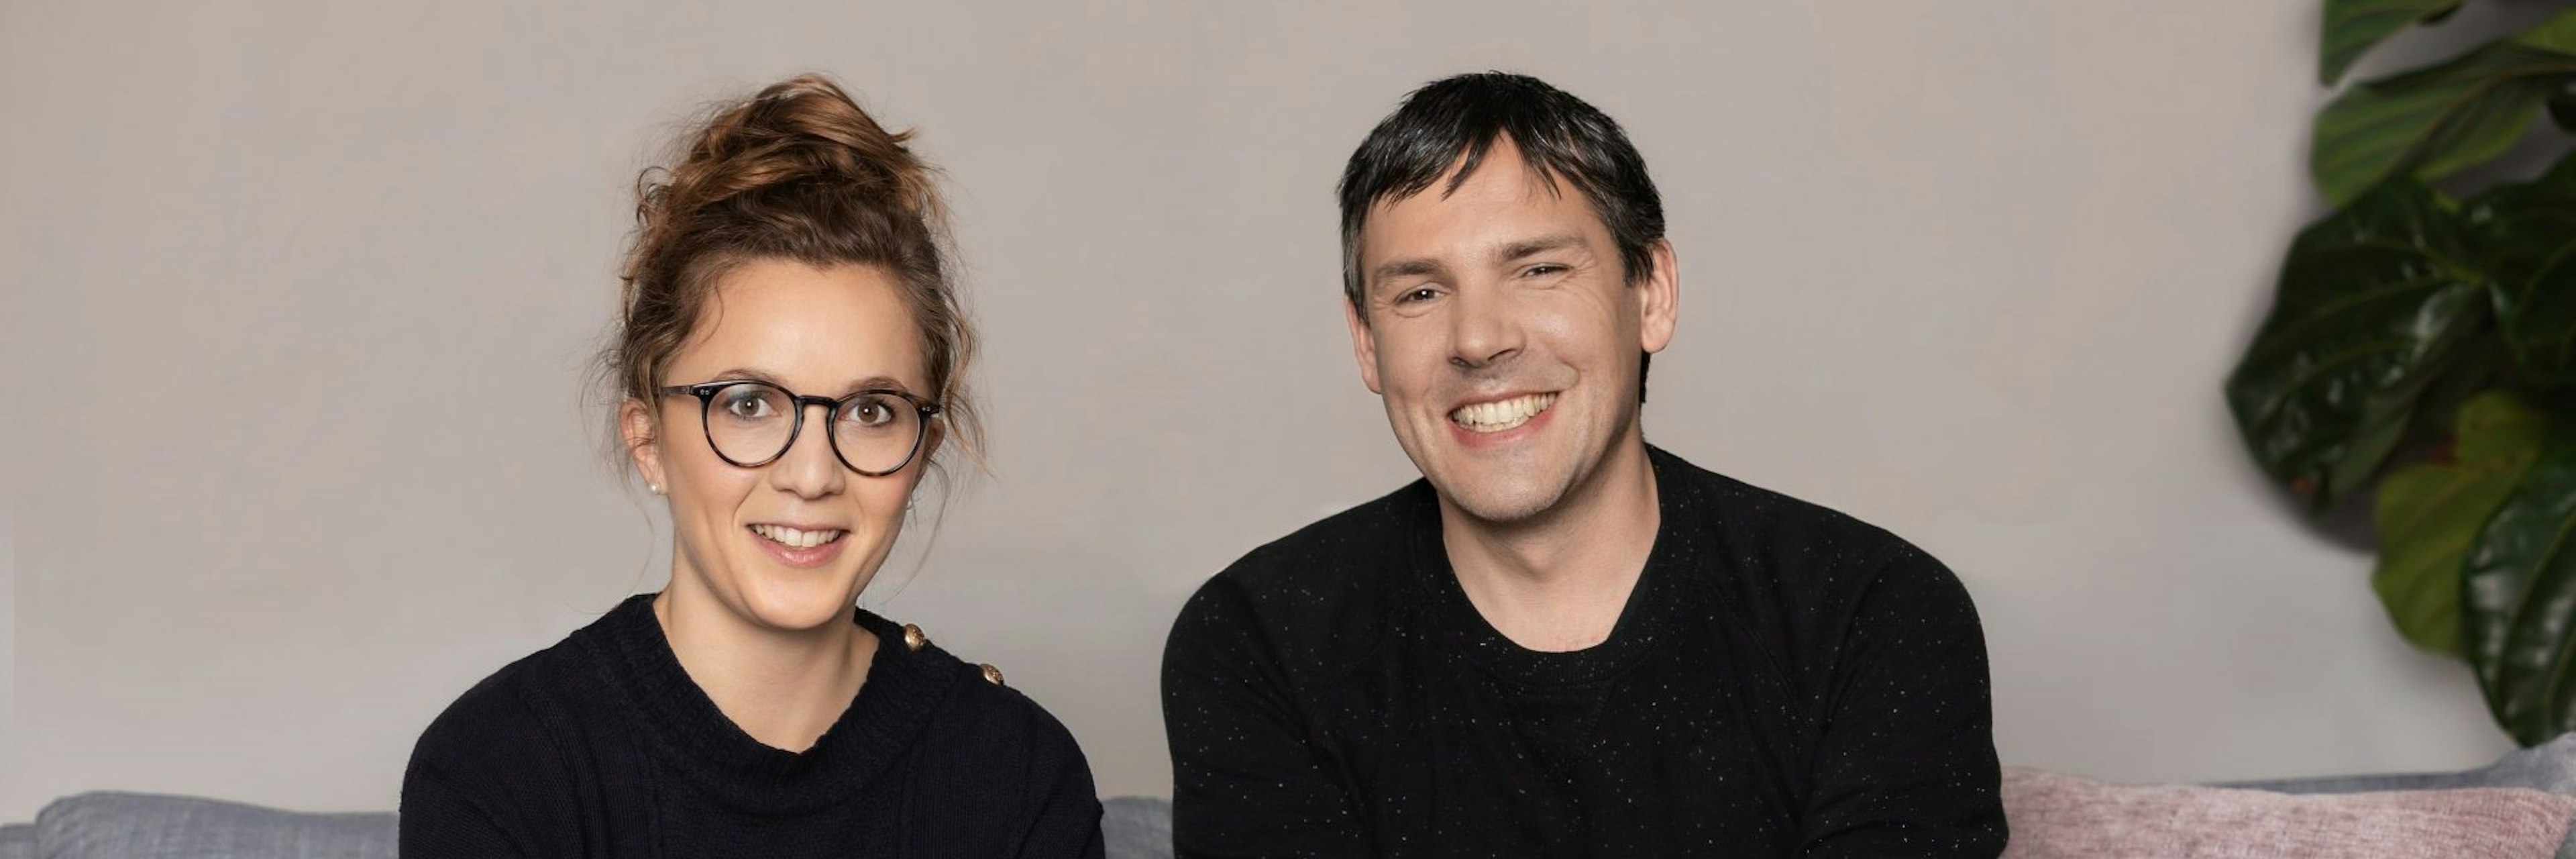 Mathilde Collin (cofounder and CEO) and Laurent Perrin (cofounder and CTO) of Front